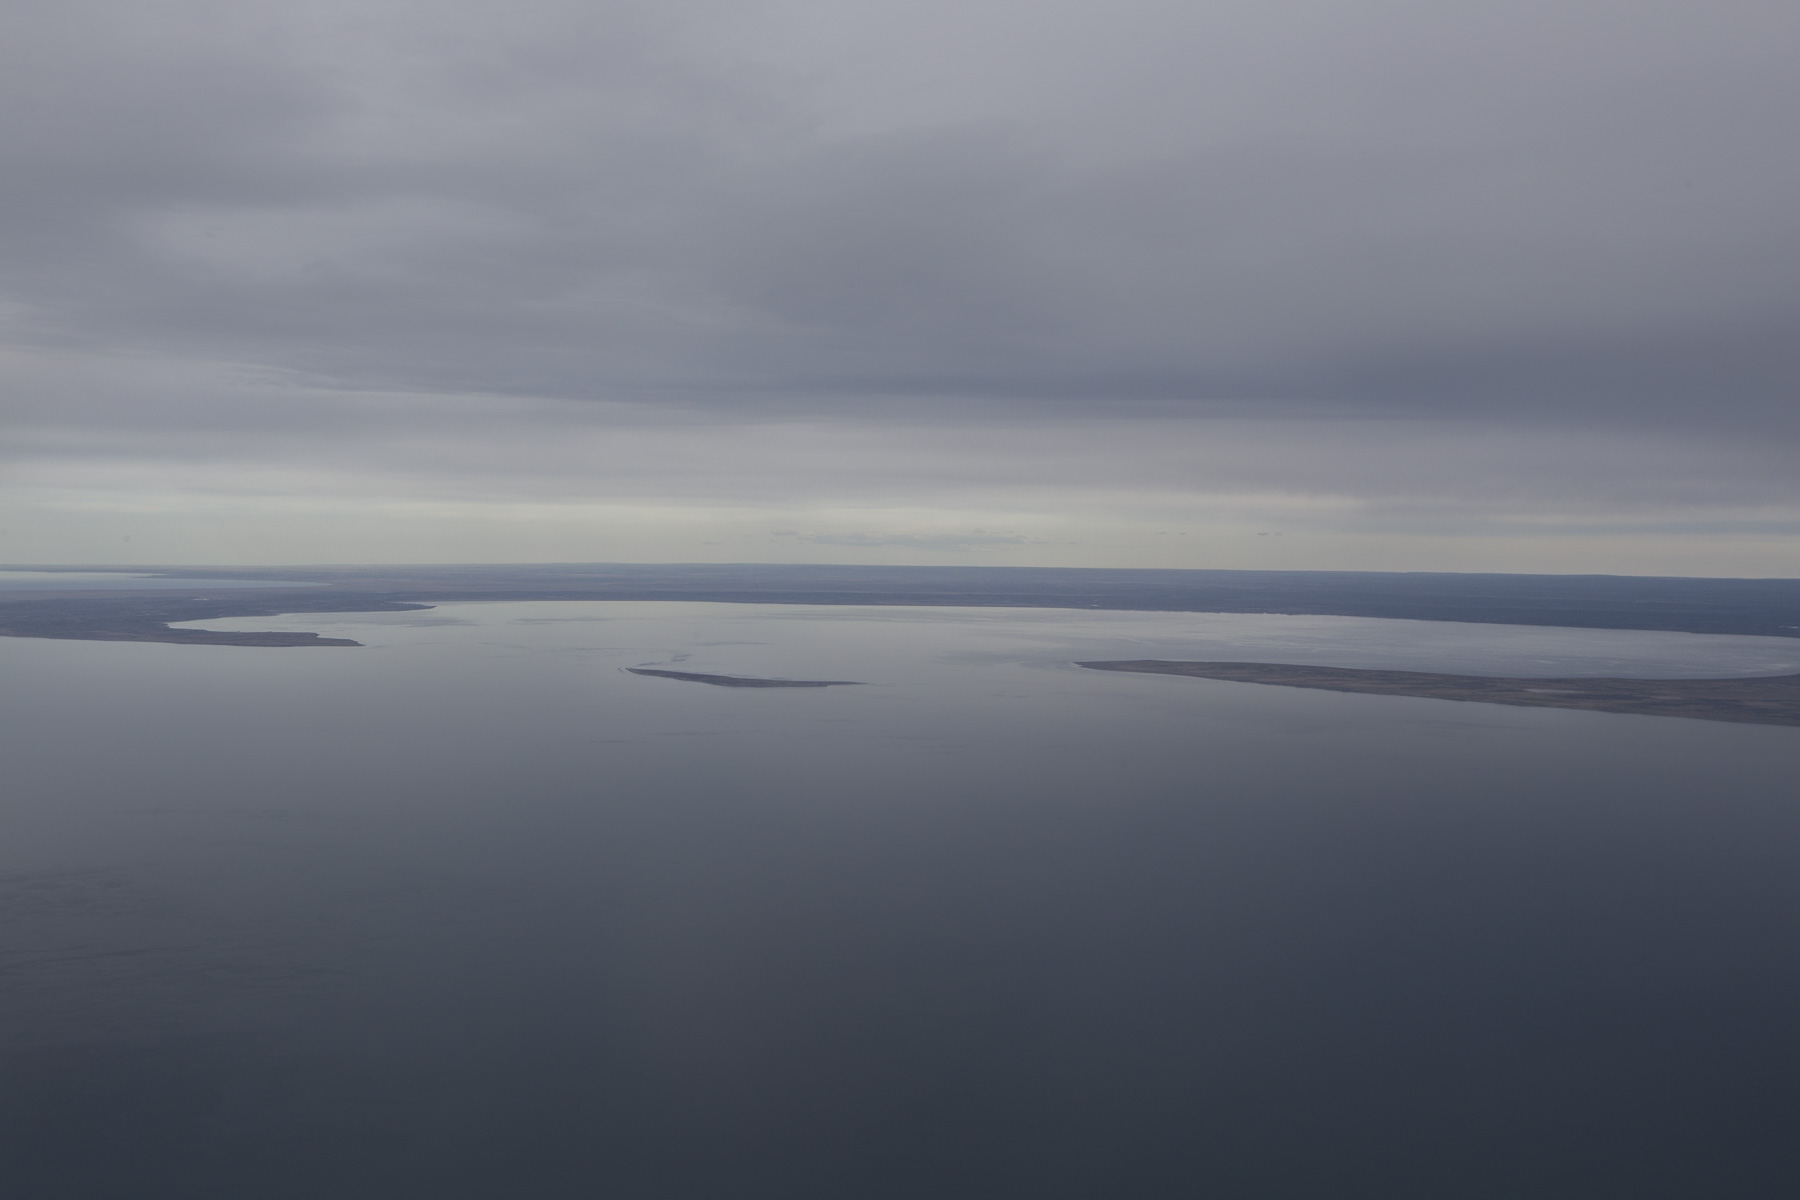 Descent to Punta Arenas and surrounding waters